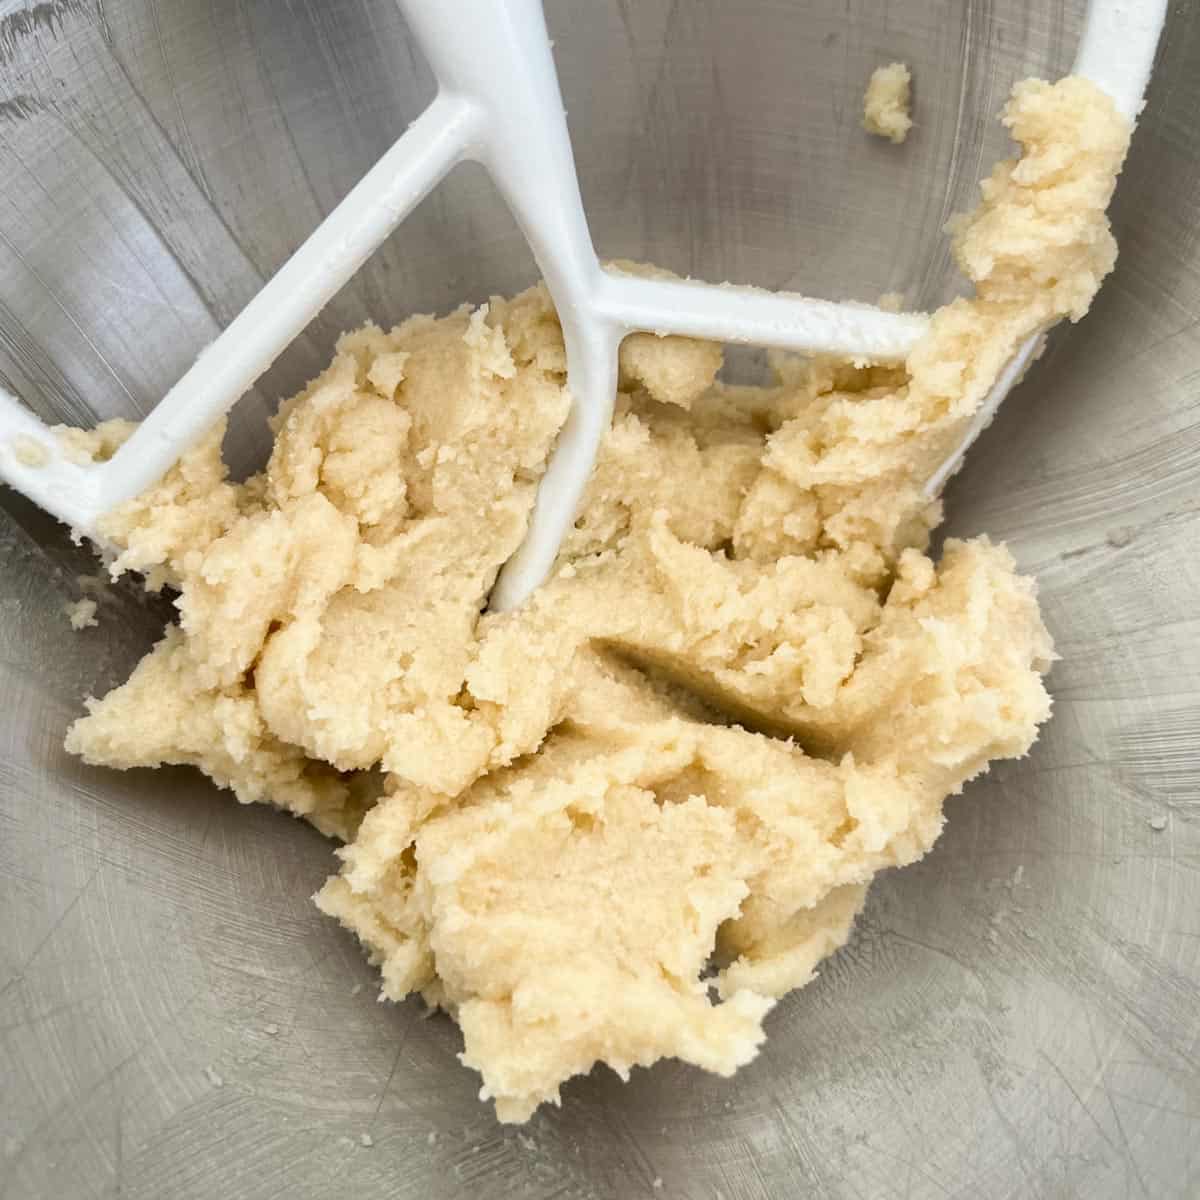 Butter and sugar creamed together in a bowl.